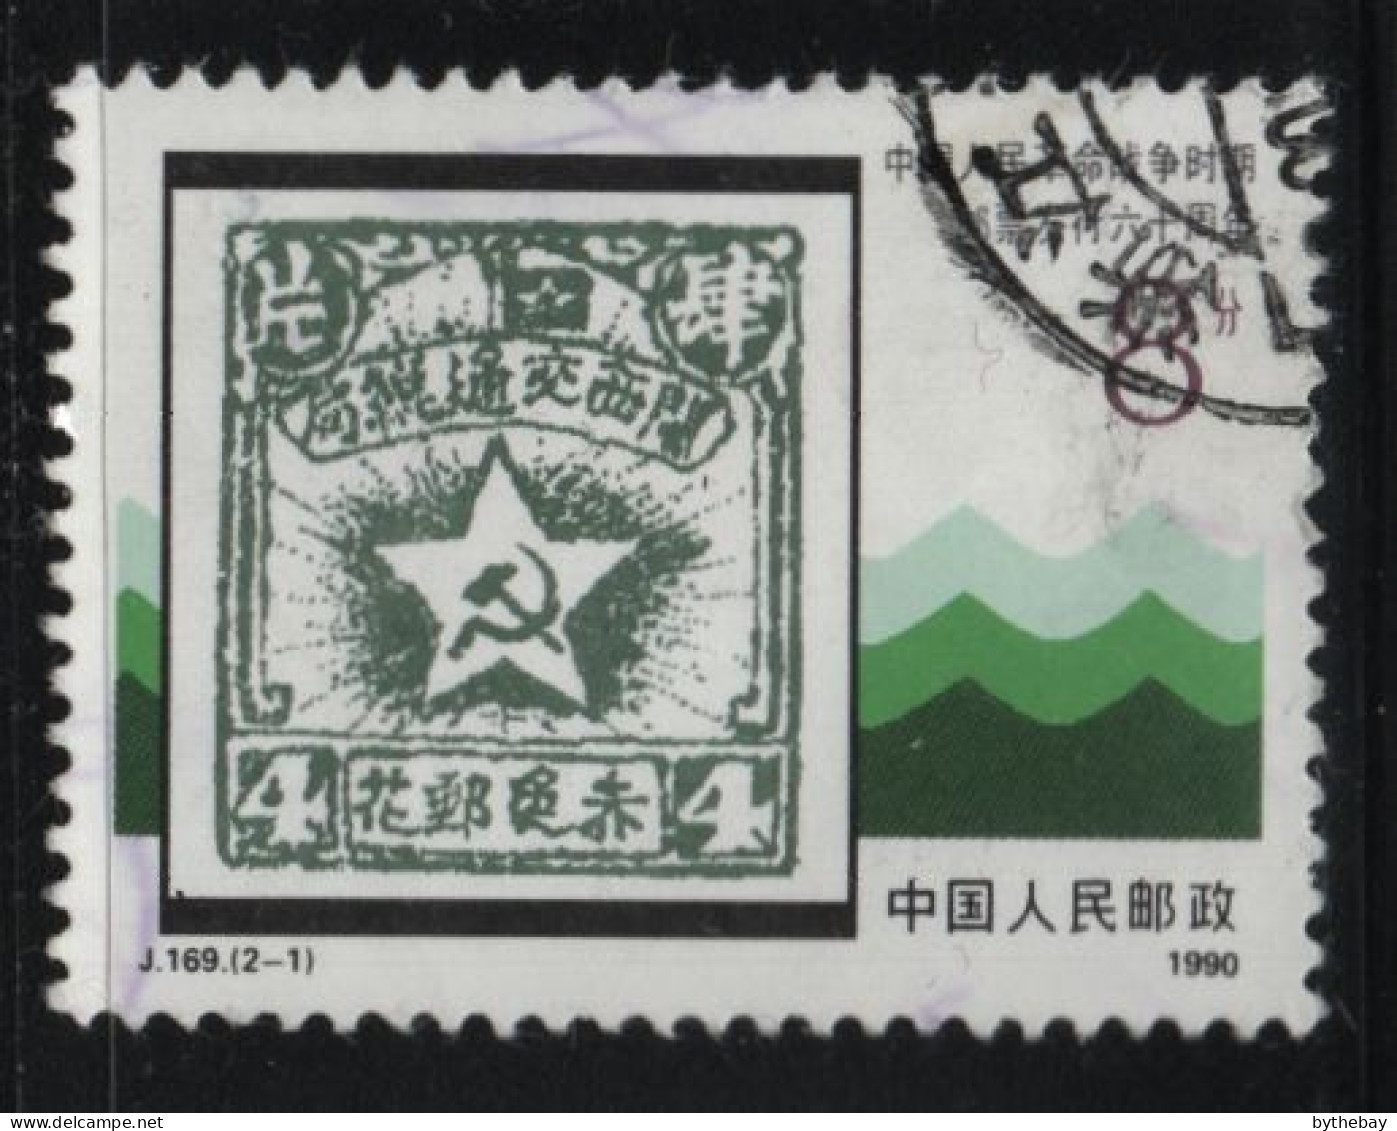 China People's Republic 1990 Used Sc 2289 8f Chinese Soviet Post Stamp 1931 - Used Stamps